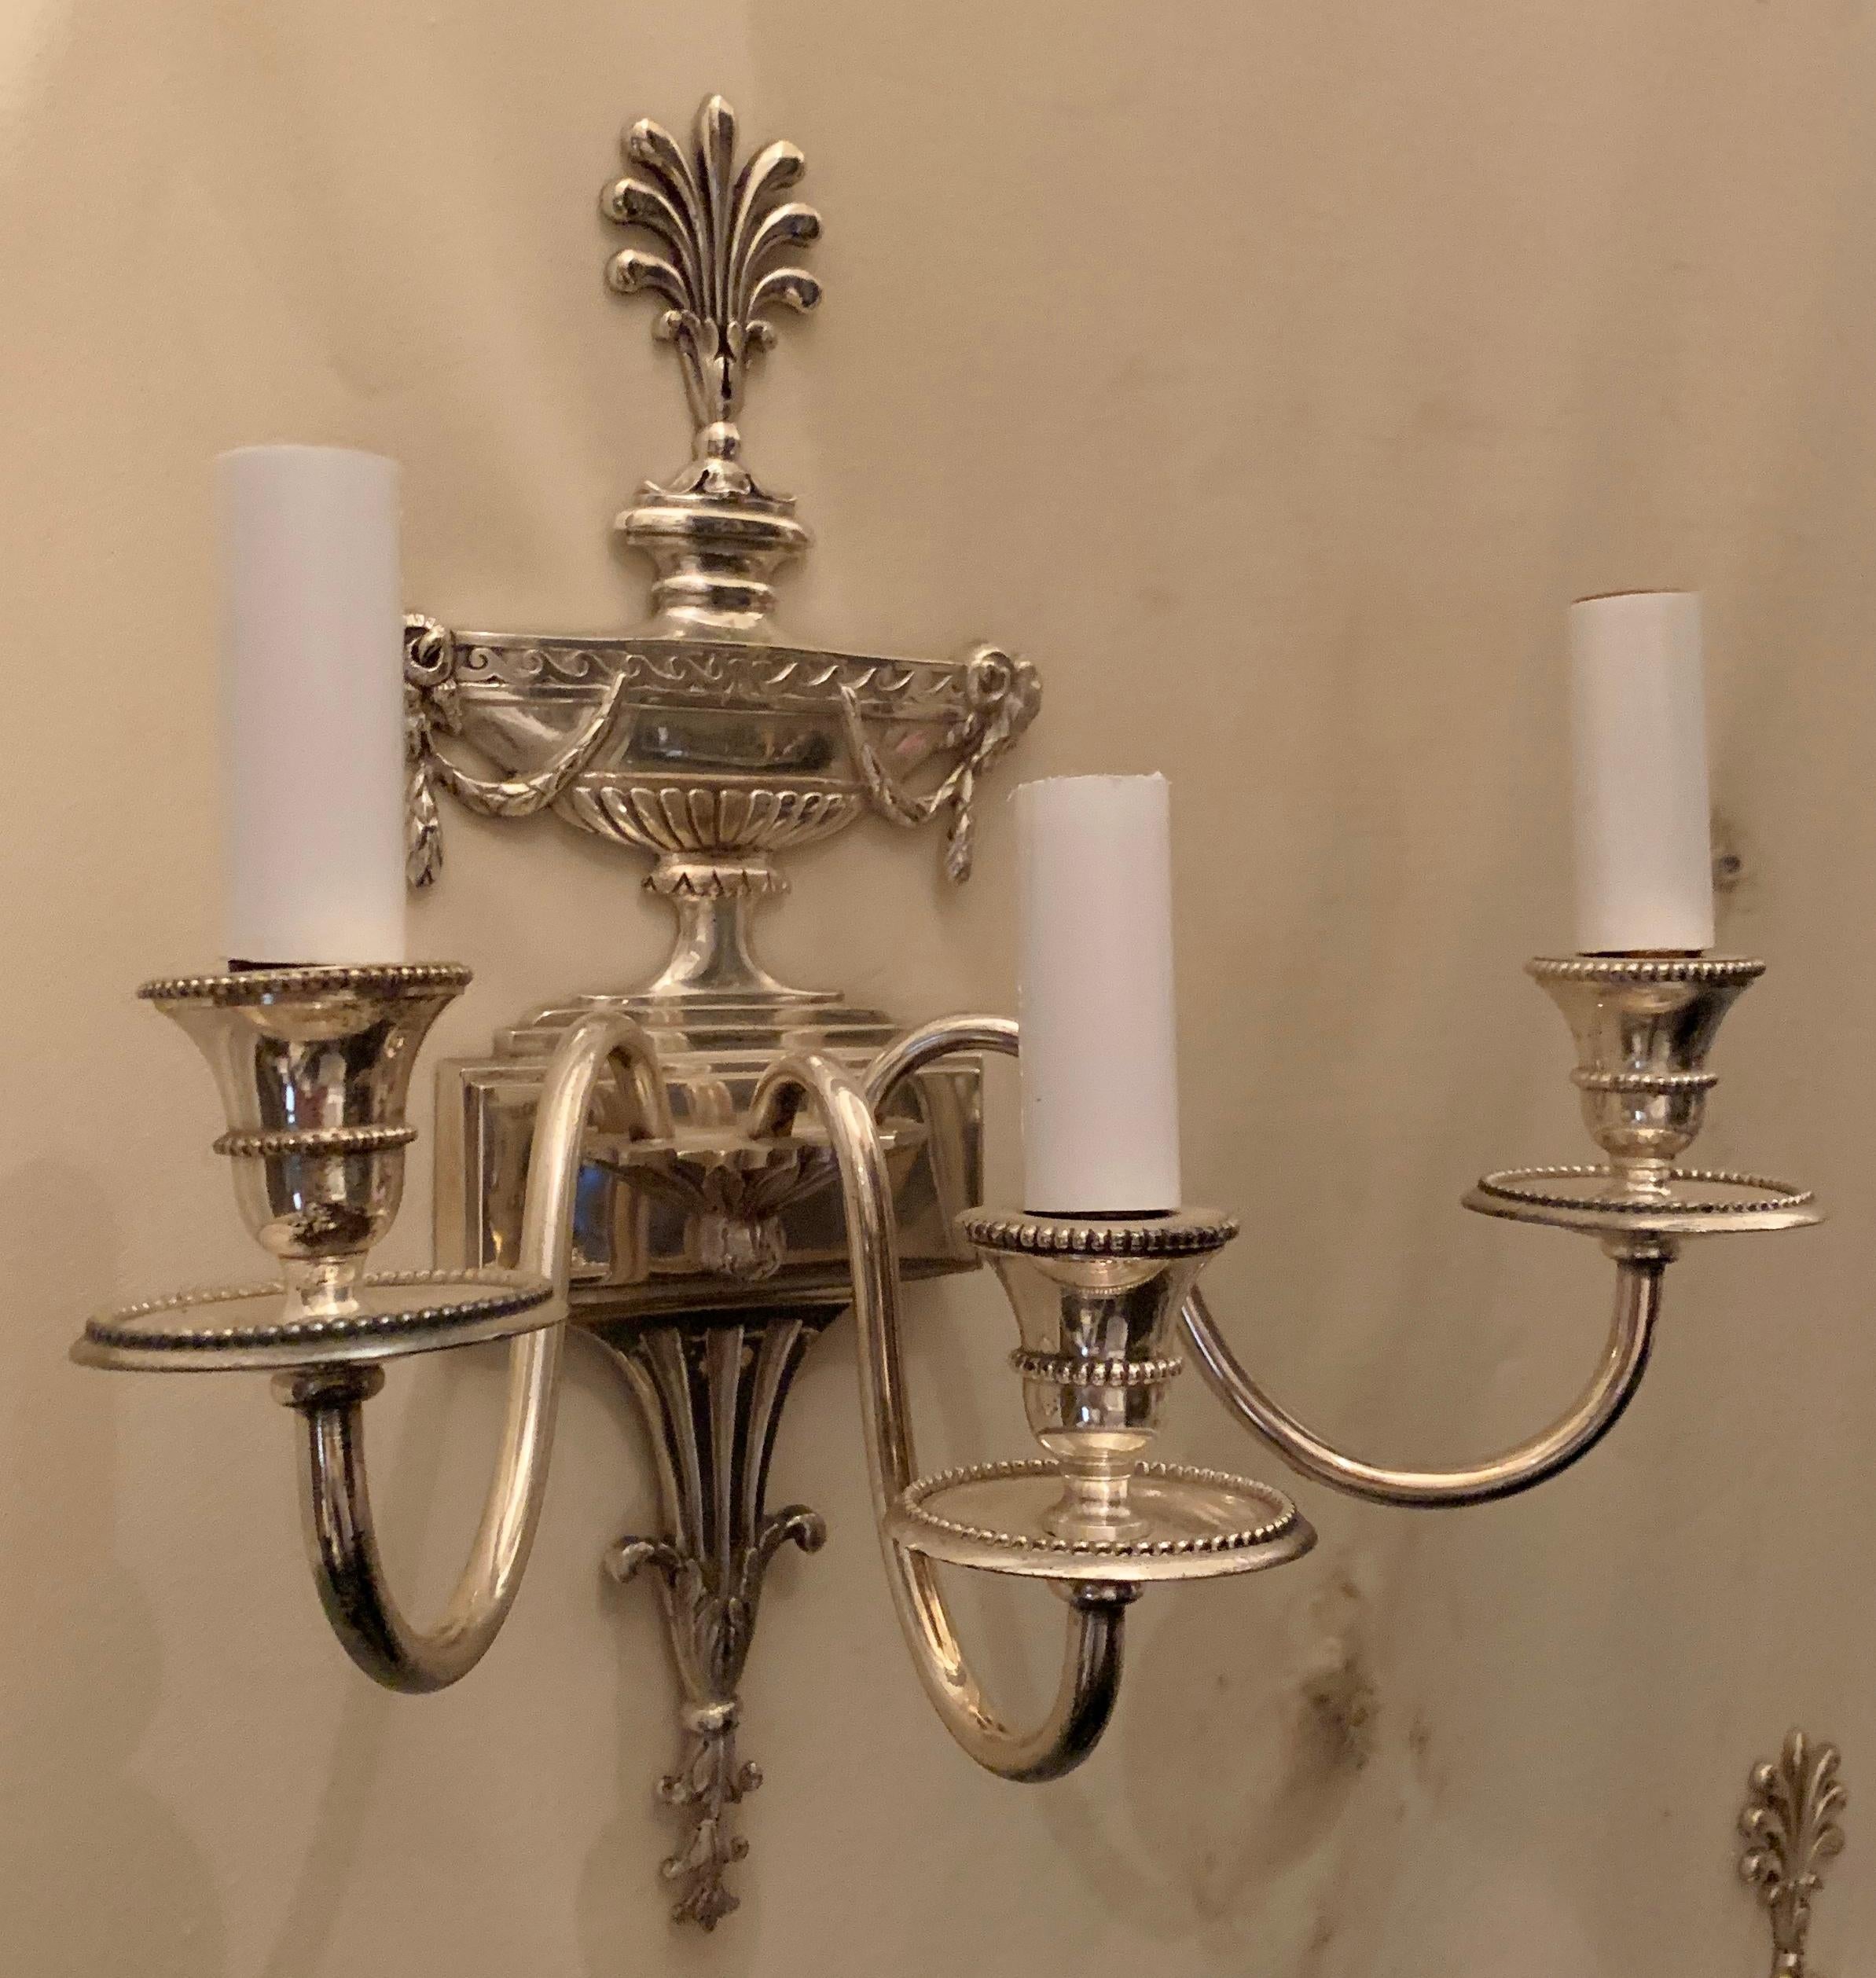 A wonderful pair of silvered / polished nickel bronze sconces with a Baguès Paris label in the back in the neoclassical design with urns and ram's head back plate and three candelabra sockets each, in the manner of E.F. Caldwell.